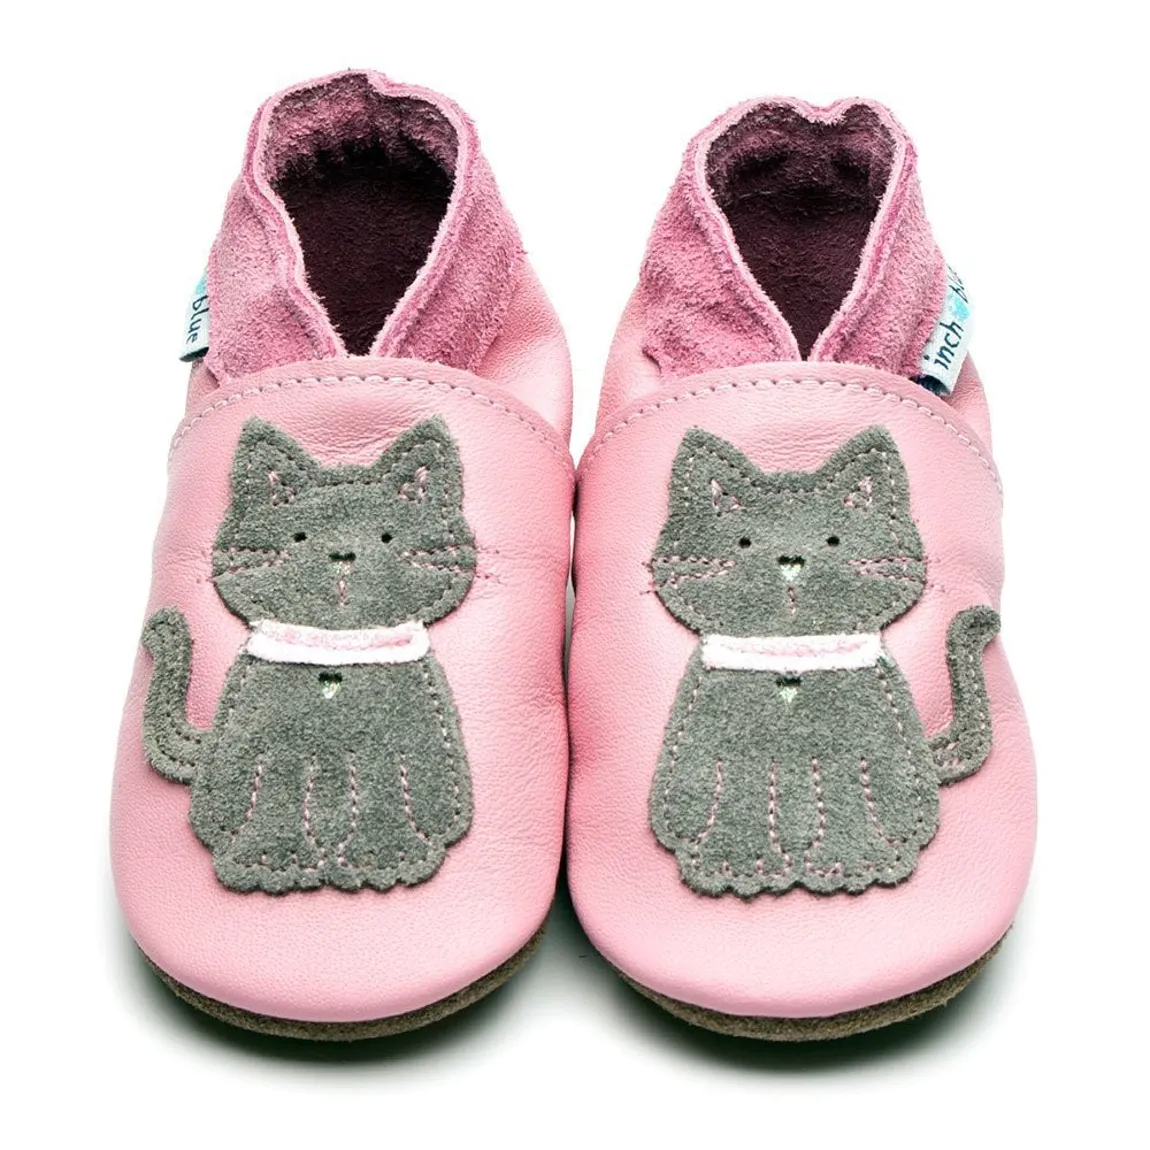 Chaussons cuir chaton rose